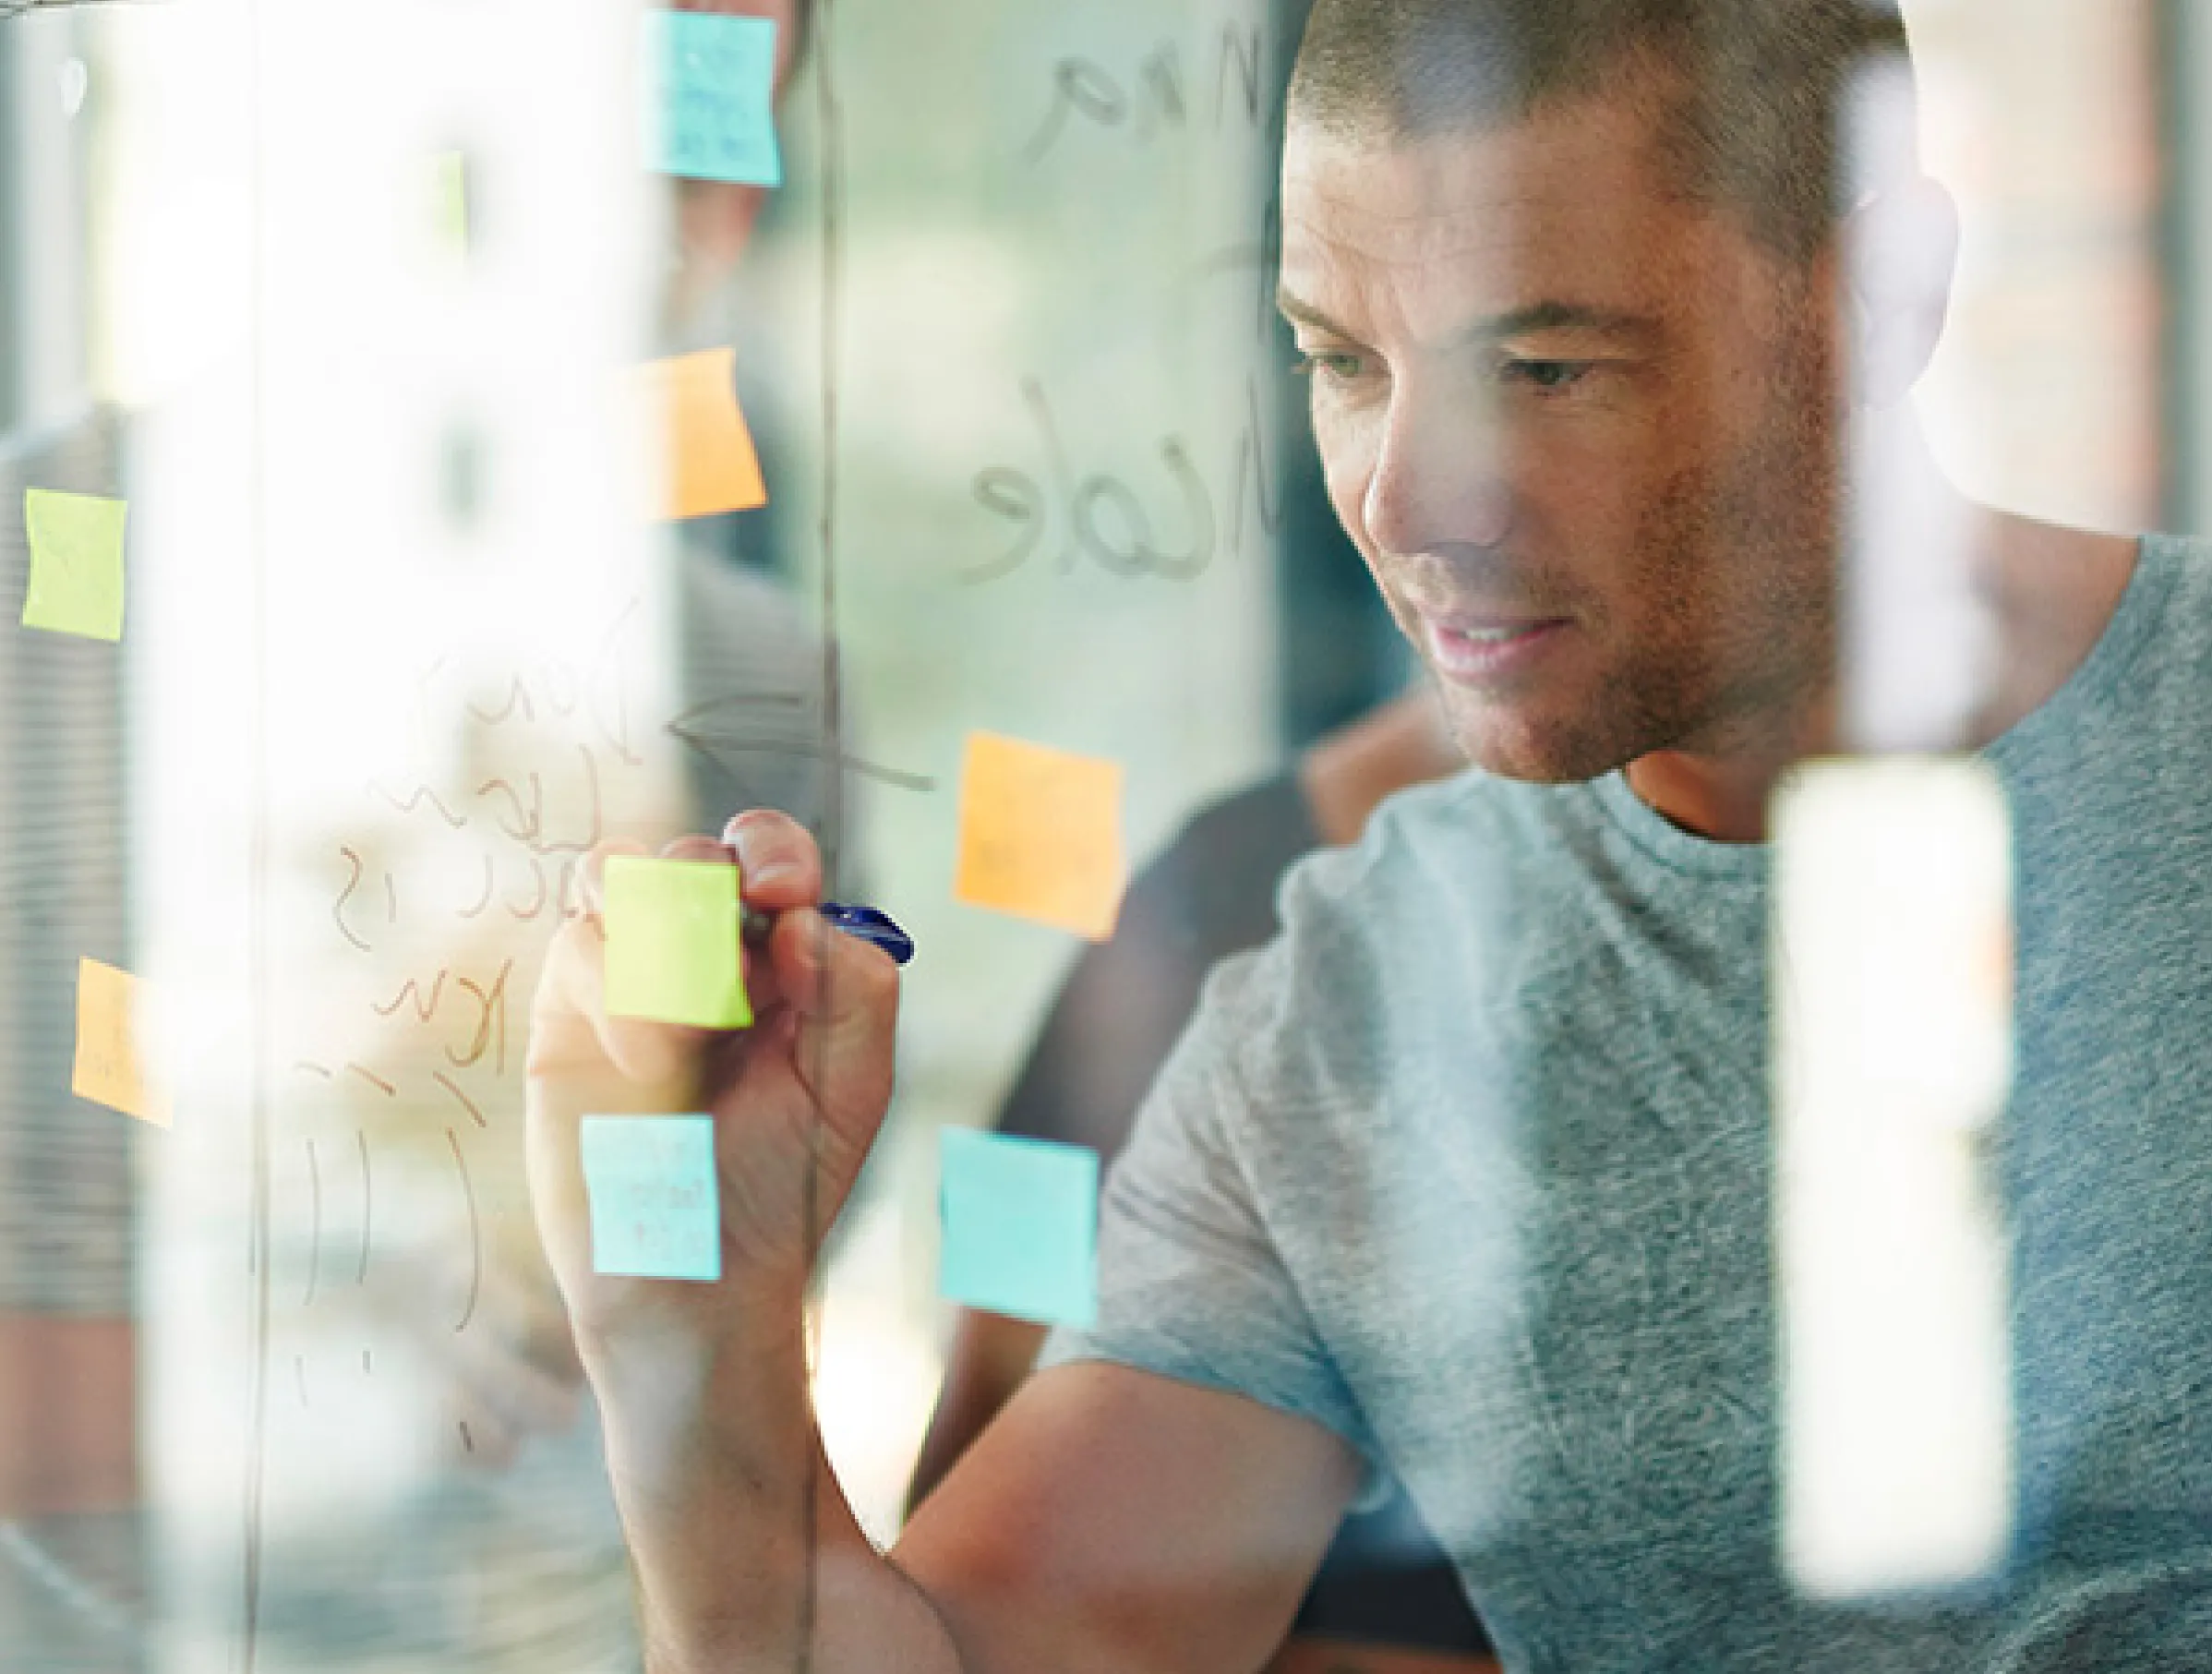 Career Ready brand consultancy image showing a man writing on post it notes